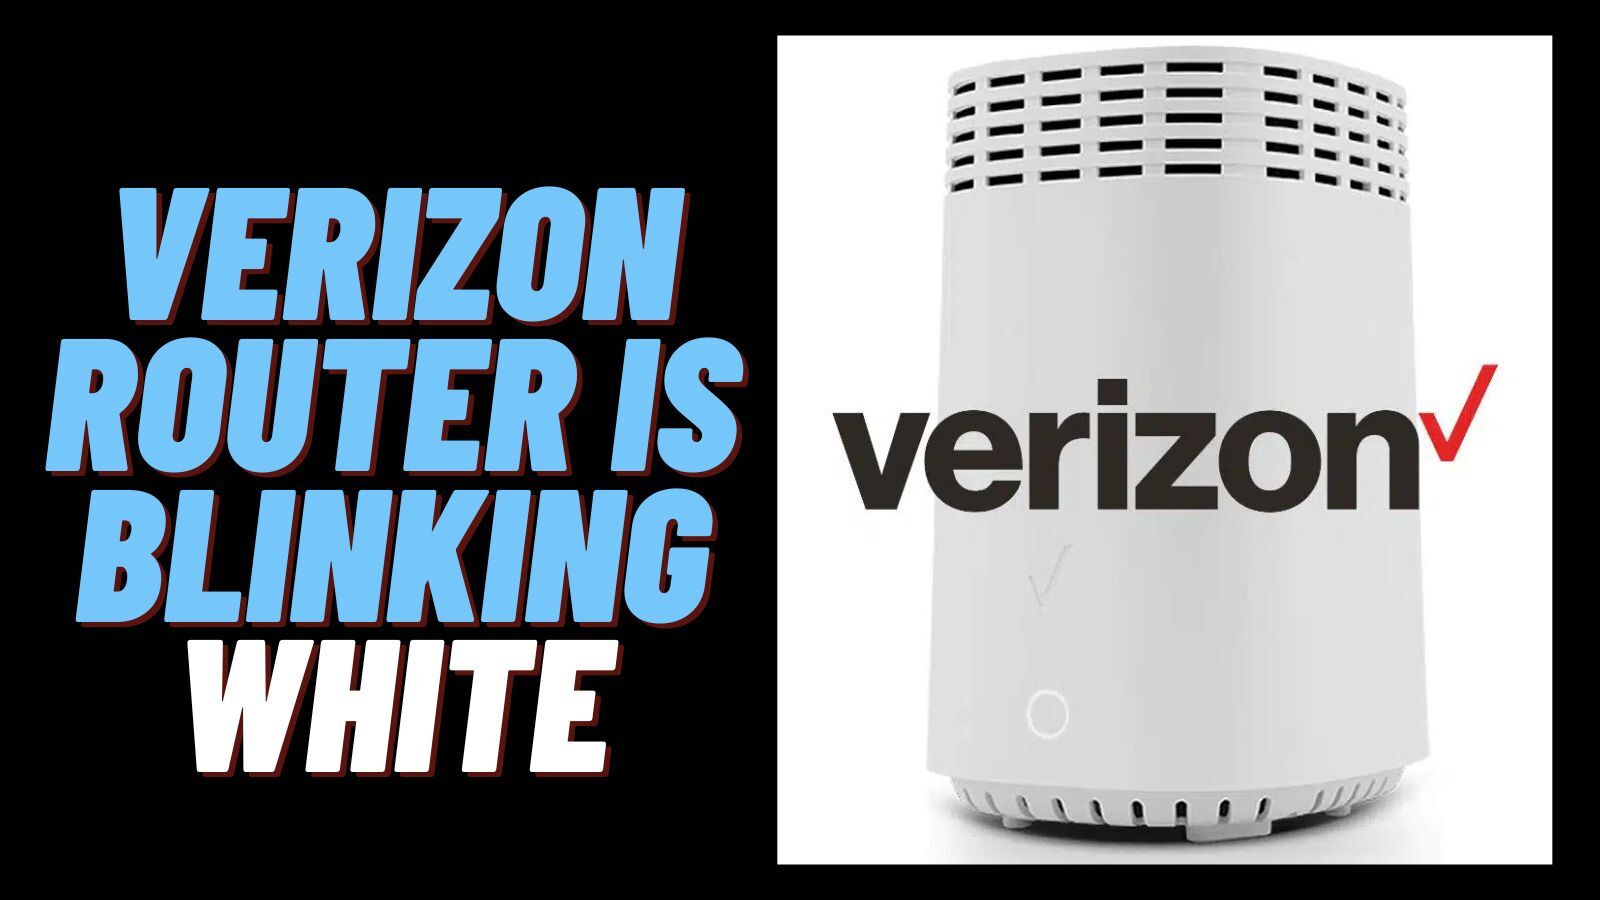 The Verizon Router Is Blinking White - Here Is How to Fix!